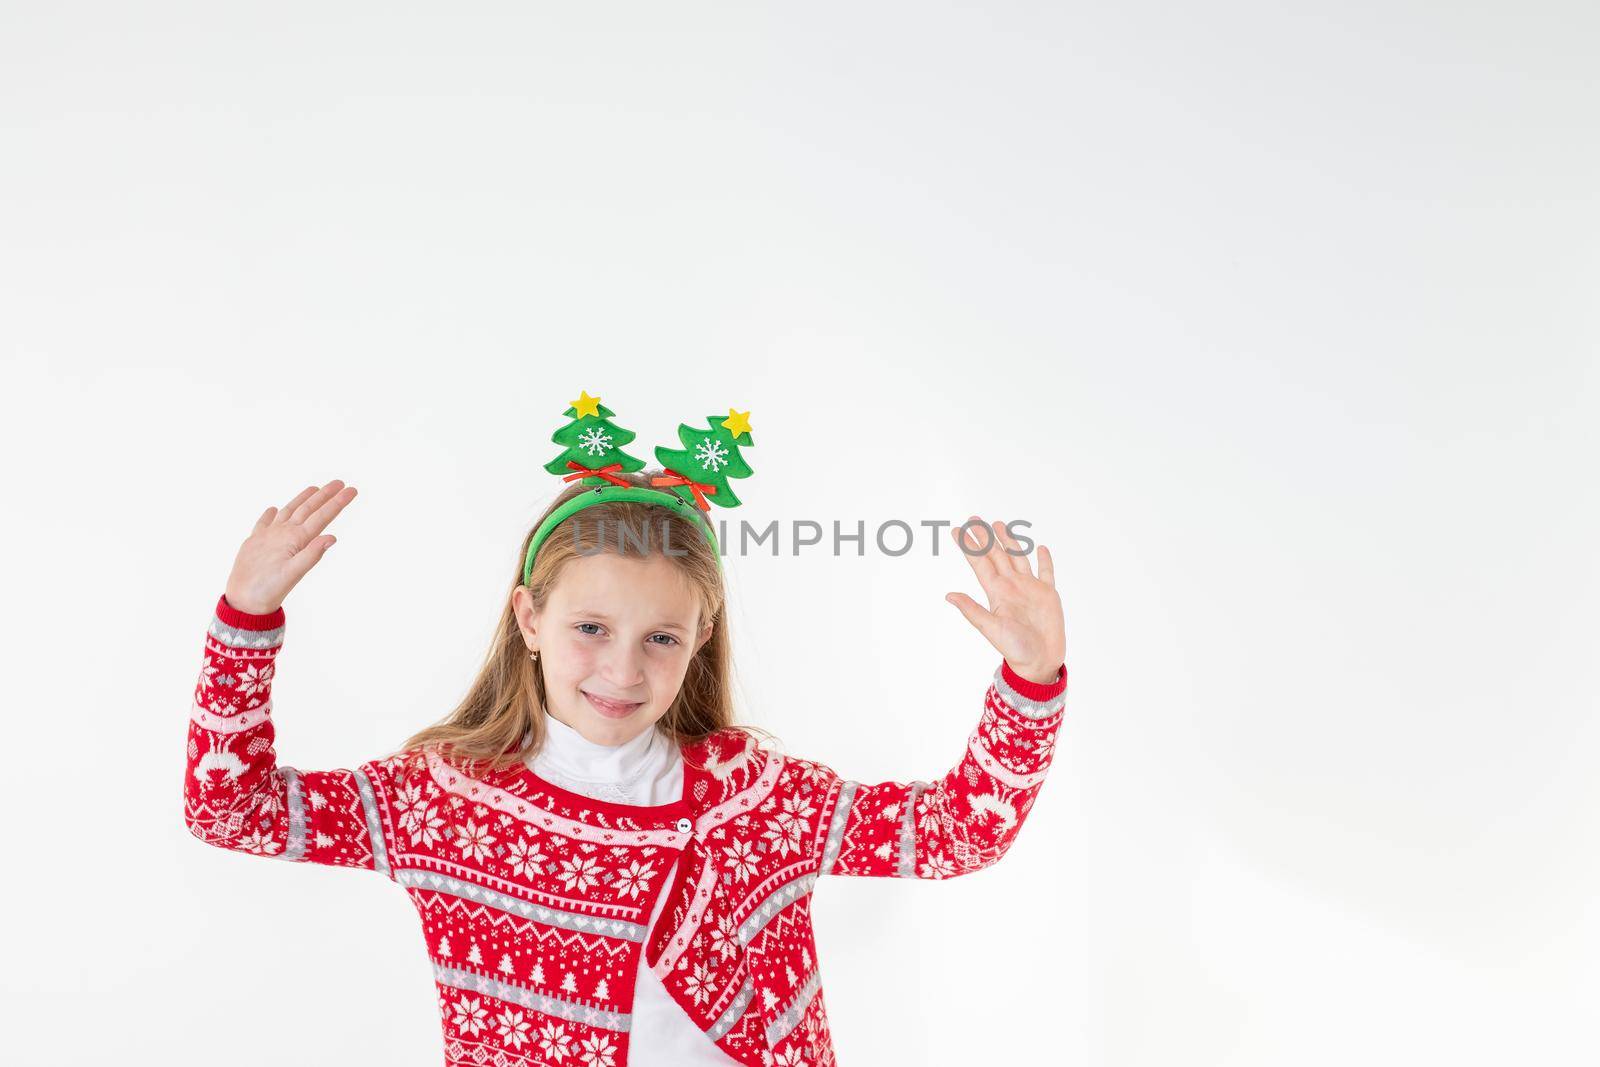 Portrait of excited funny funky schoolchild dancing in christmas costume with headband isolated on white background.Ready For Christmas party.Merry Christmas presents shopping sale concept. by YuliaYaspe1979